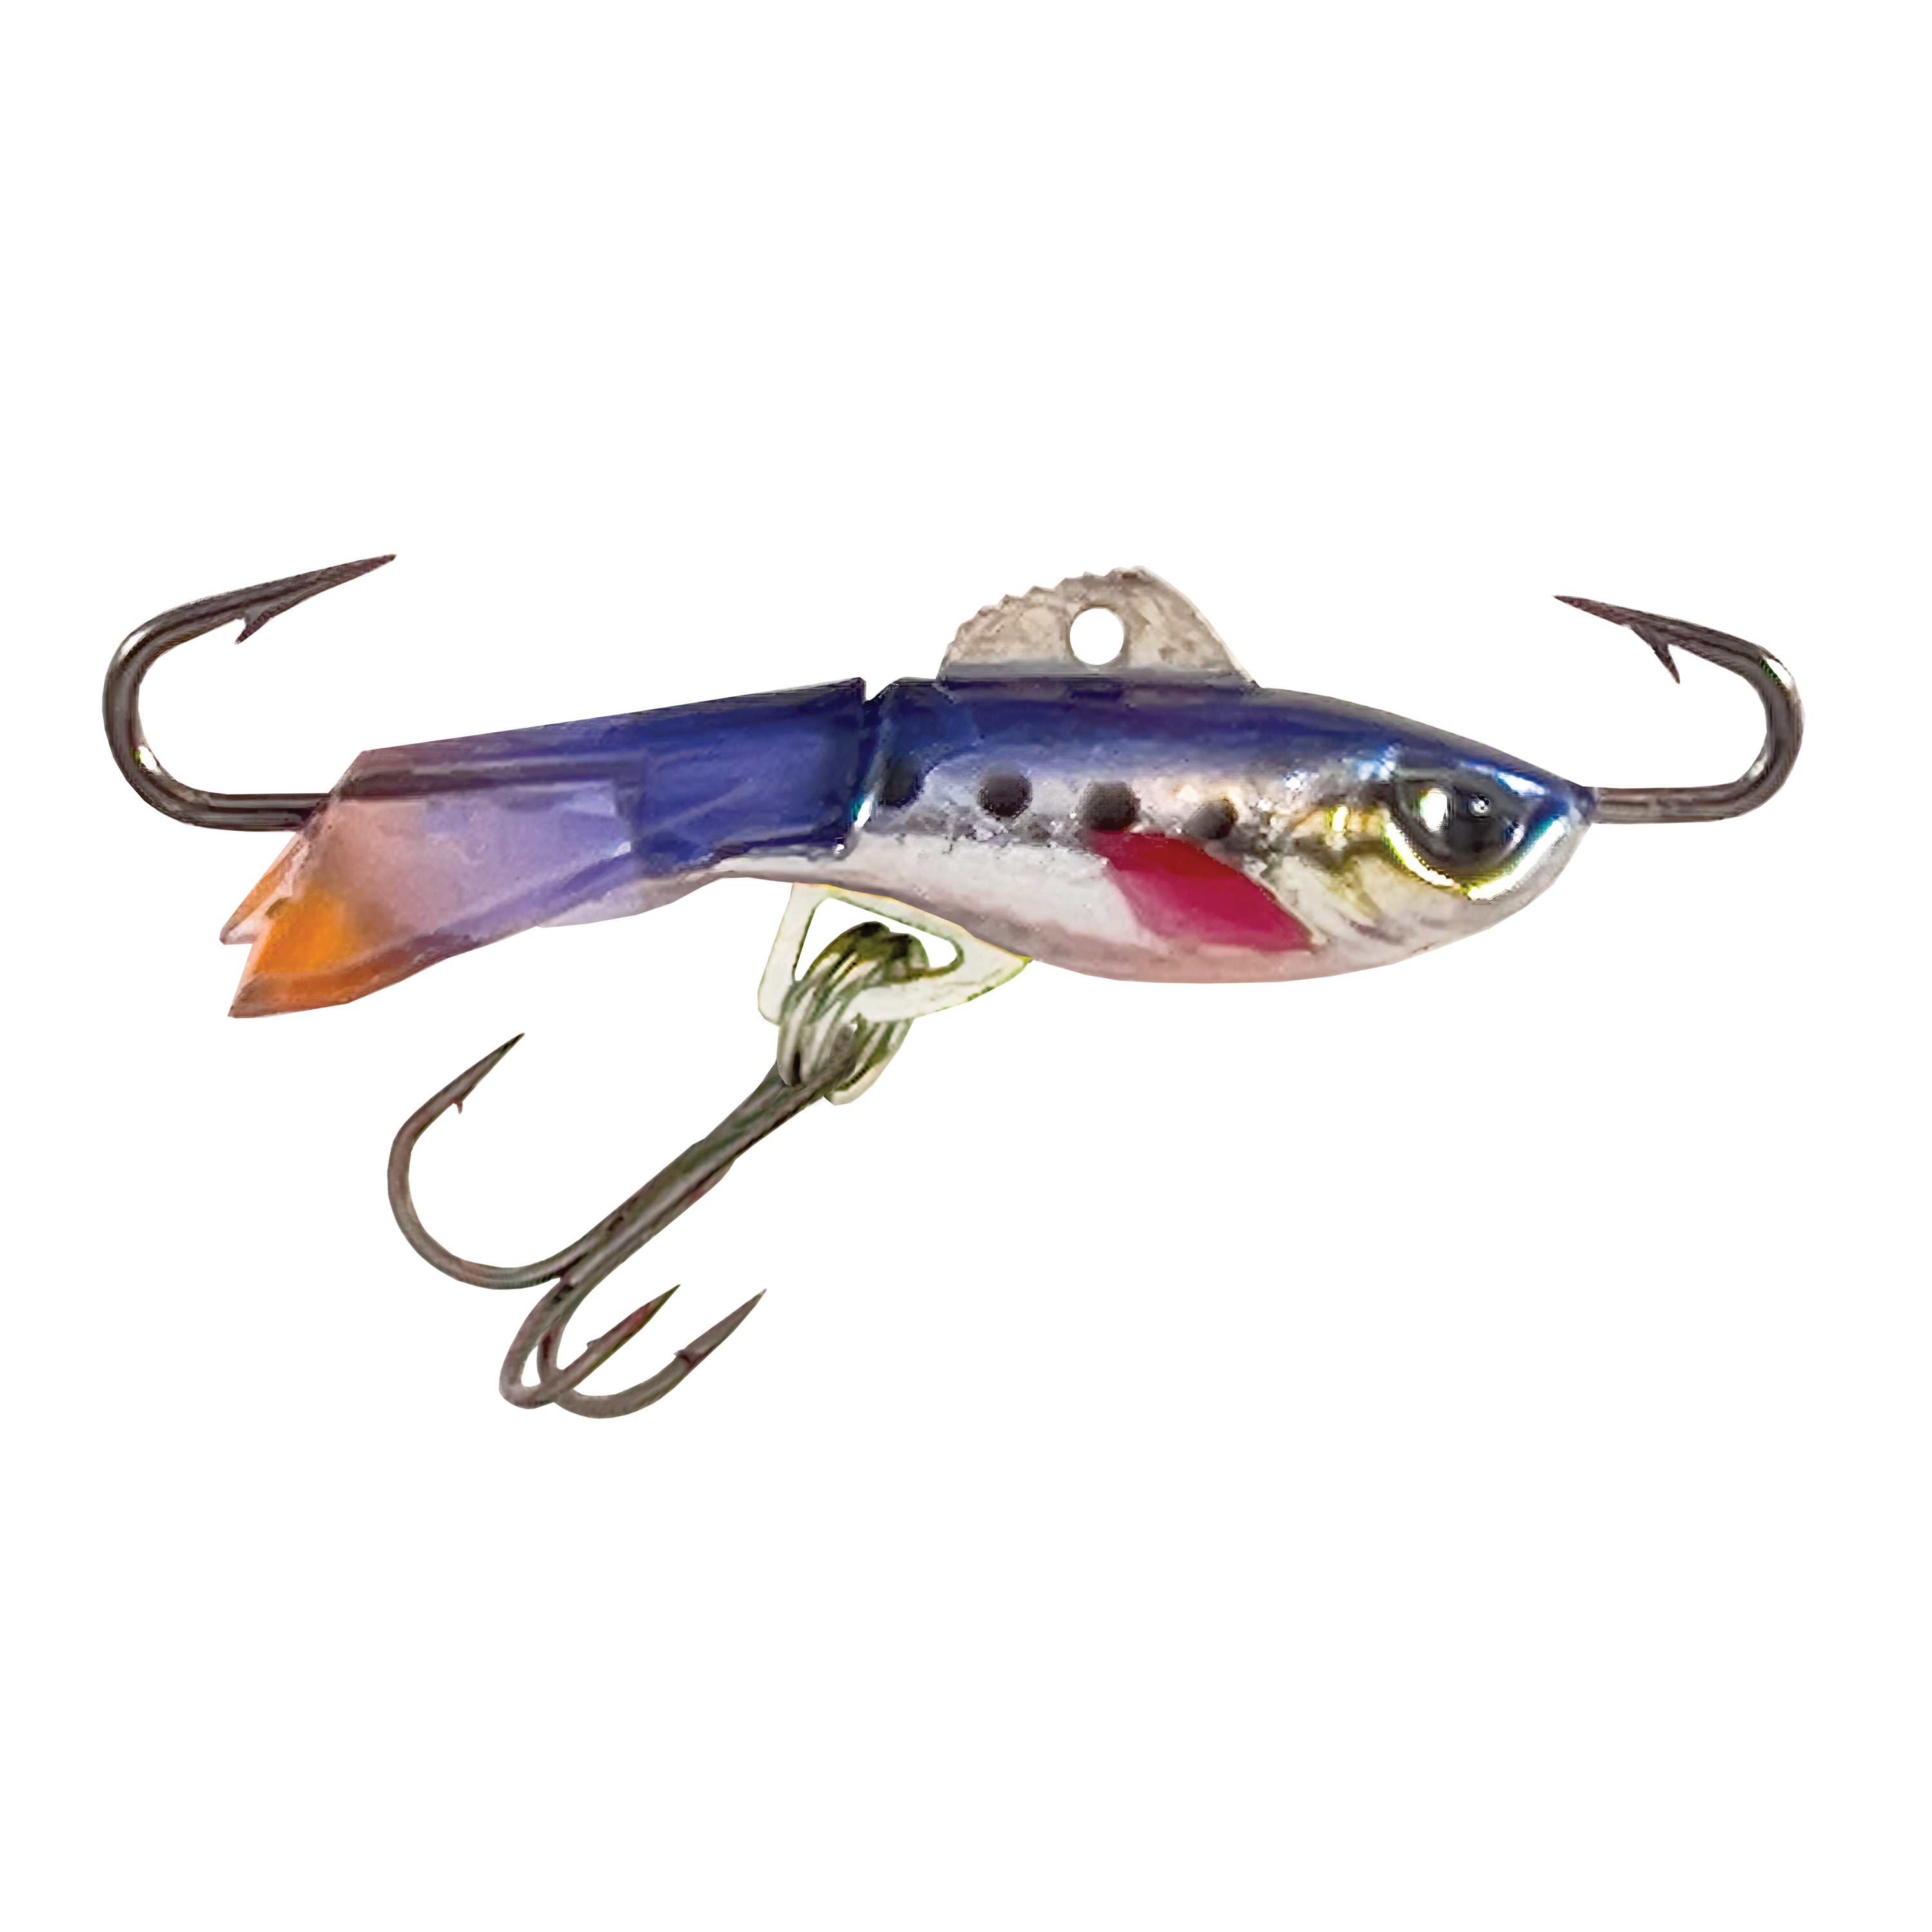 Acme Tackle Company Hyper-Rattle Hard 2.5 Jig Bait HR6 UV Glow CHOOSE YOUR  COLOR!